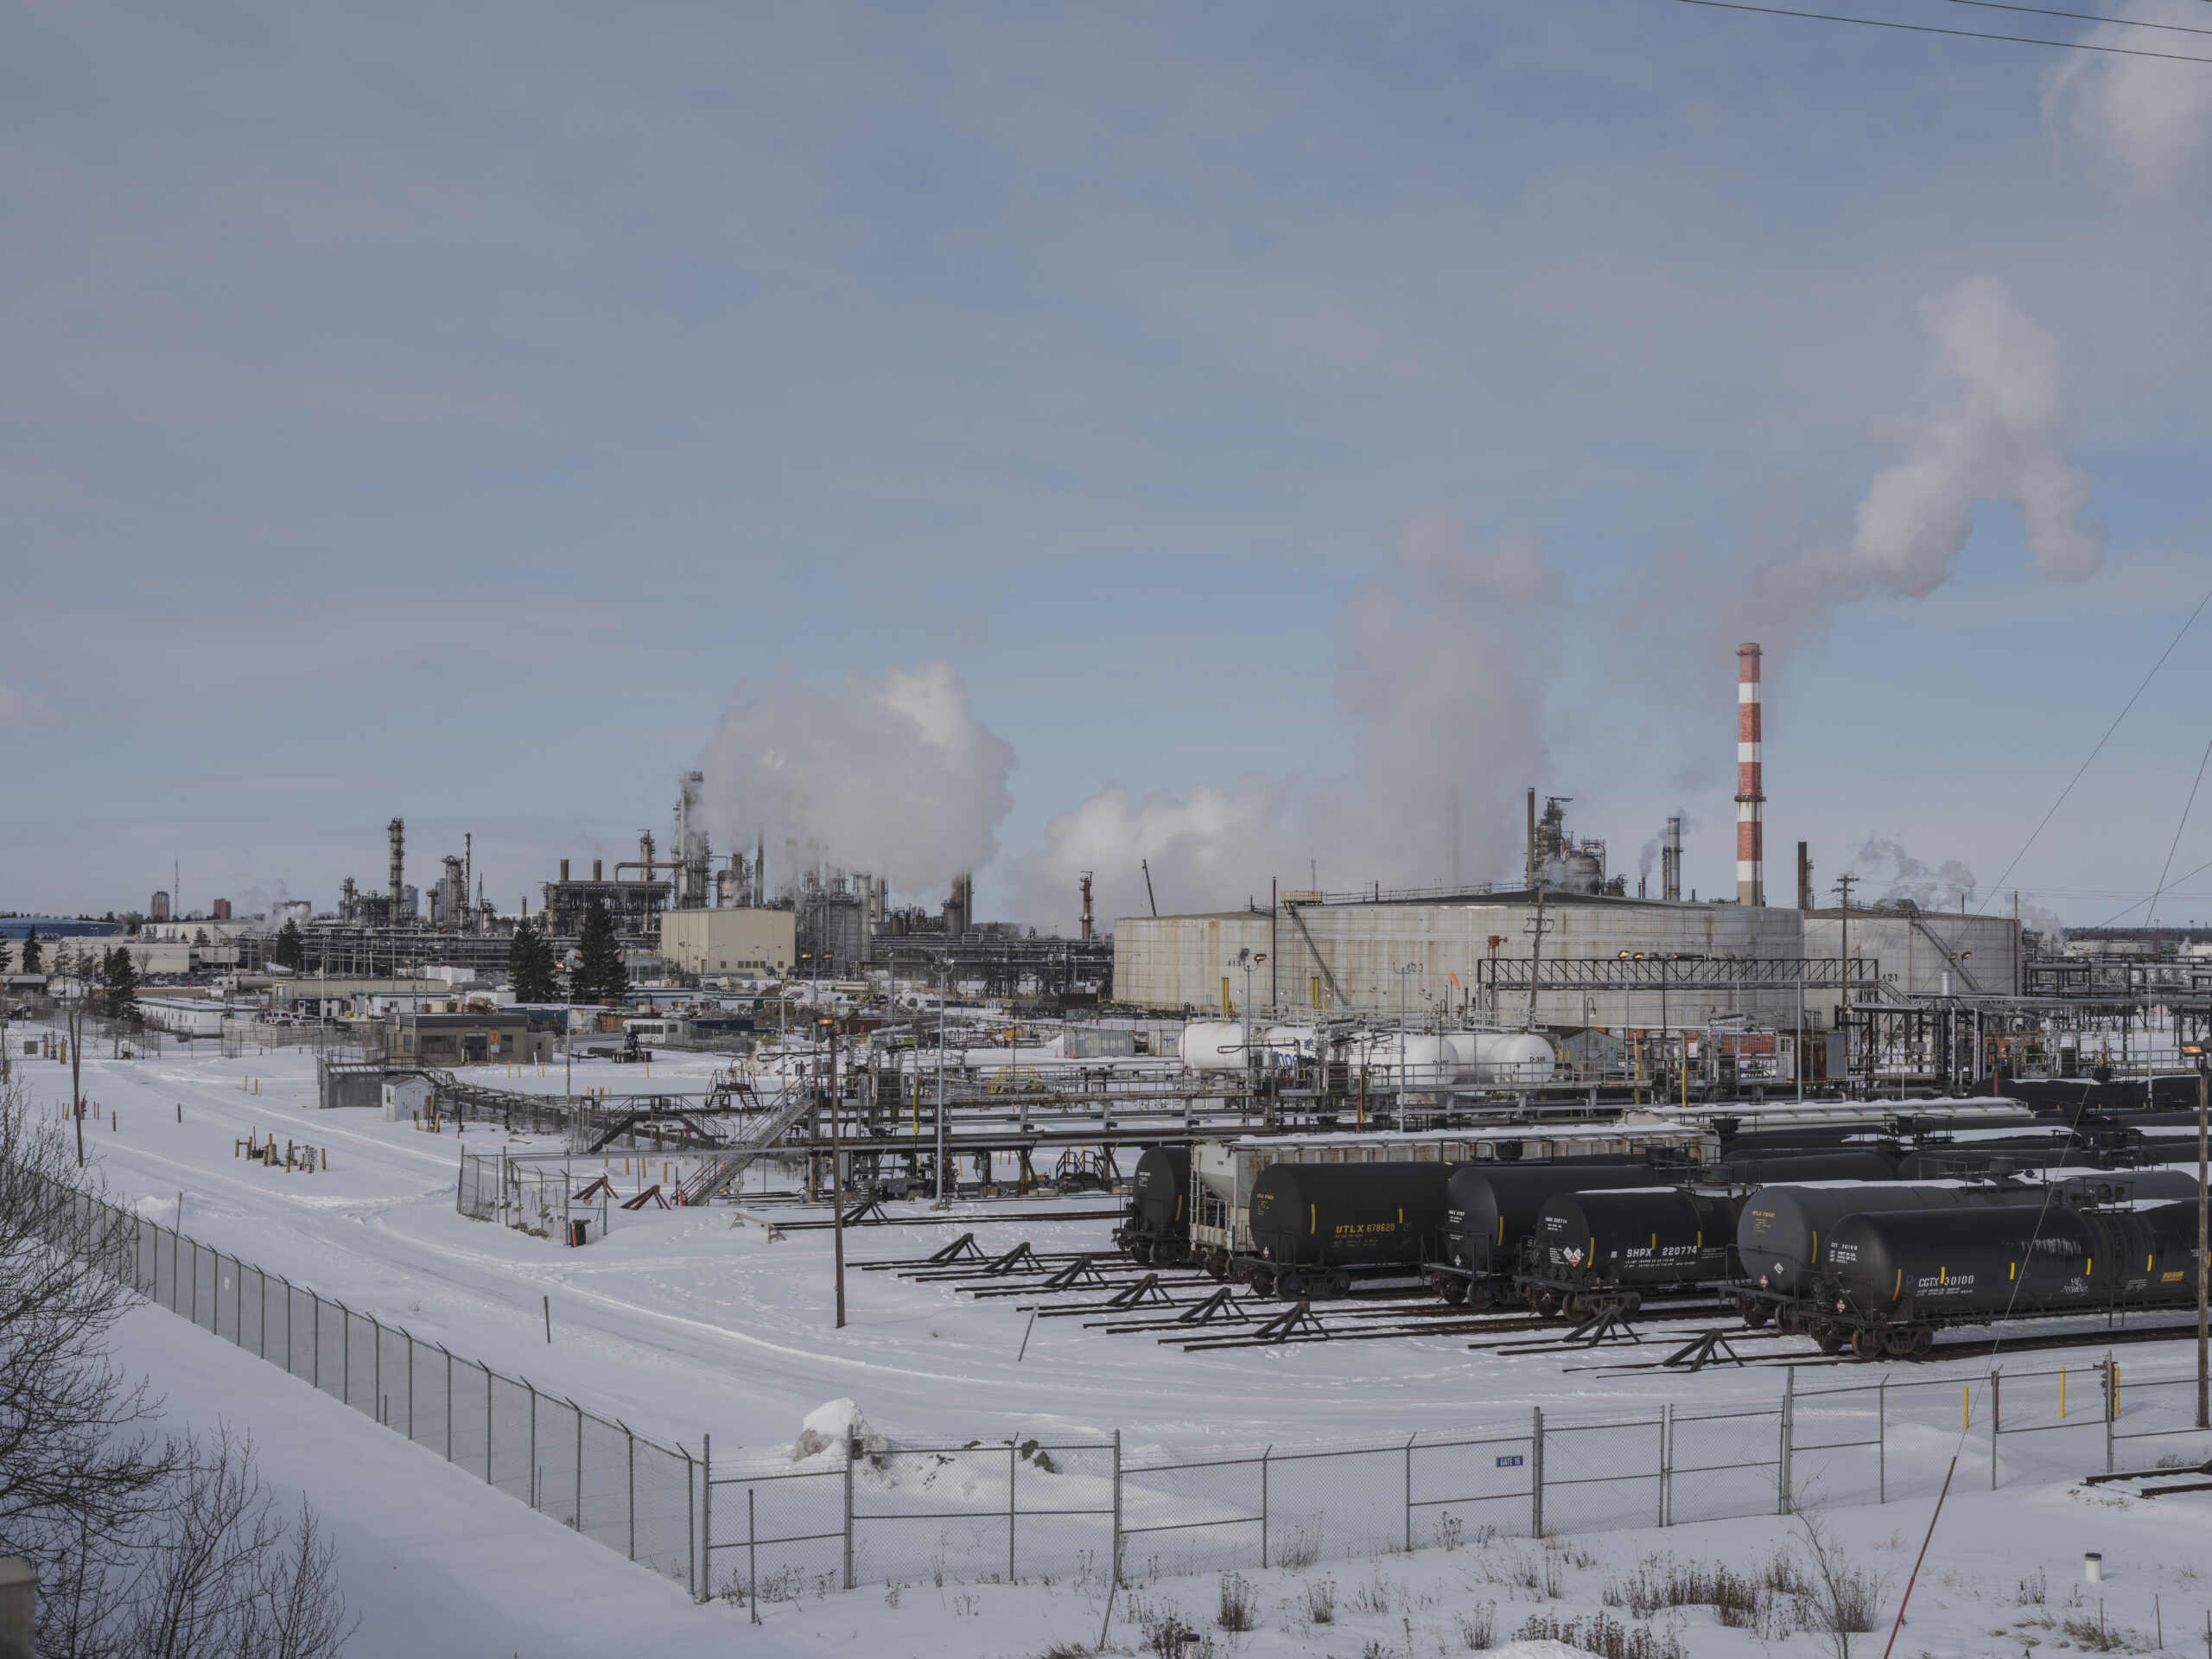 A full view of Imperial Oil refinery, with oil rail cars in the foreground. Refineries are among the facilities that are impacting the Edmonton air quality.